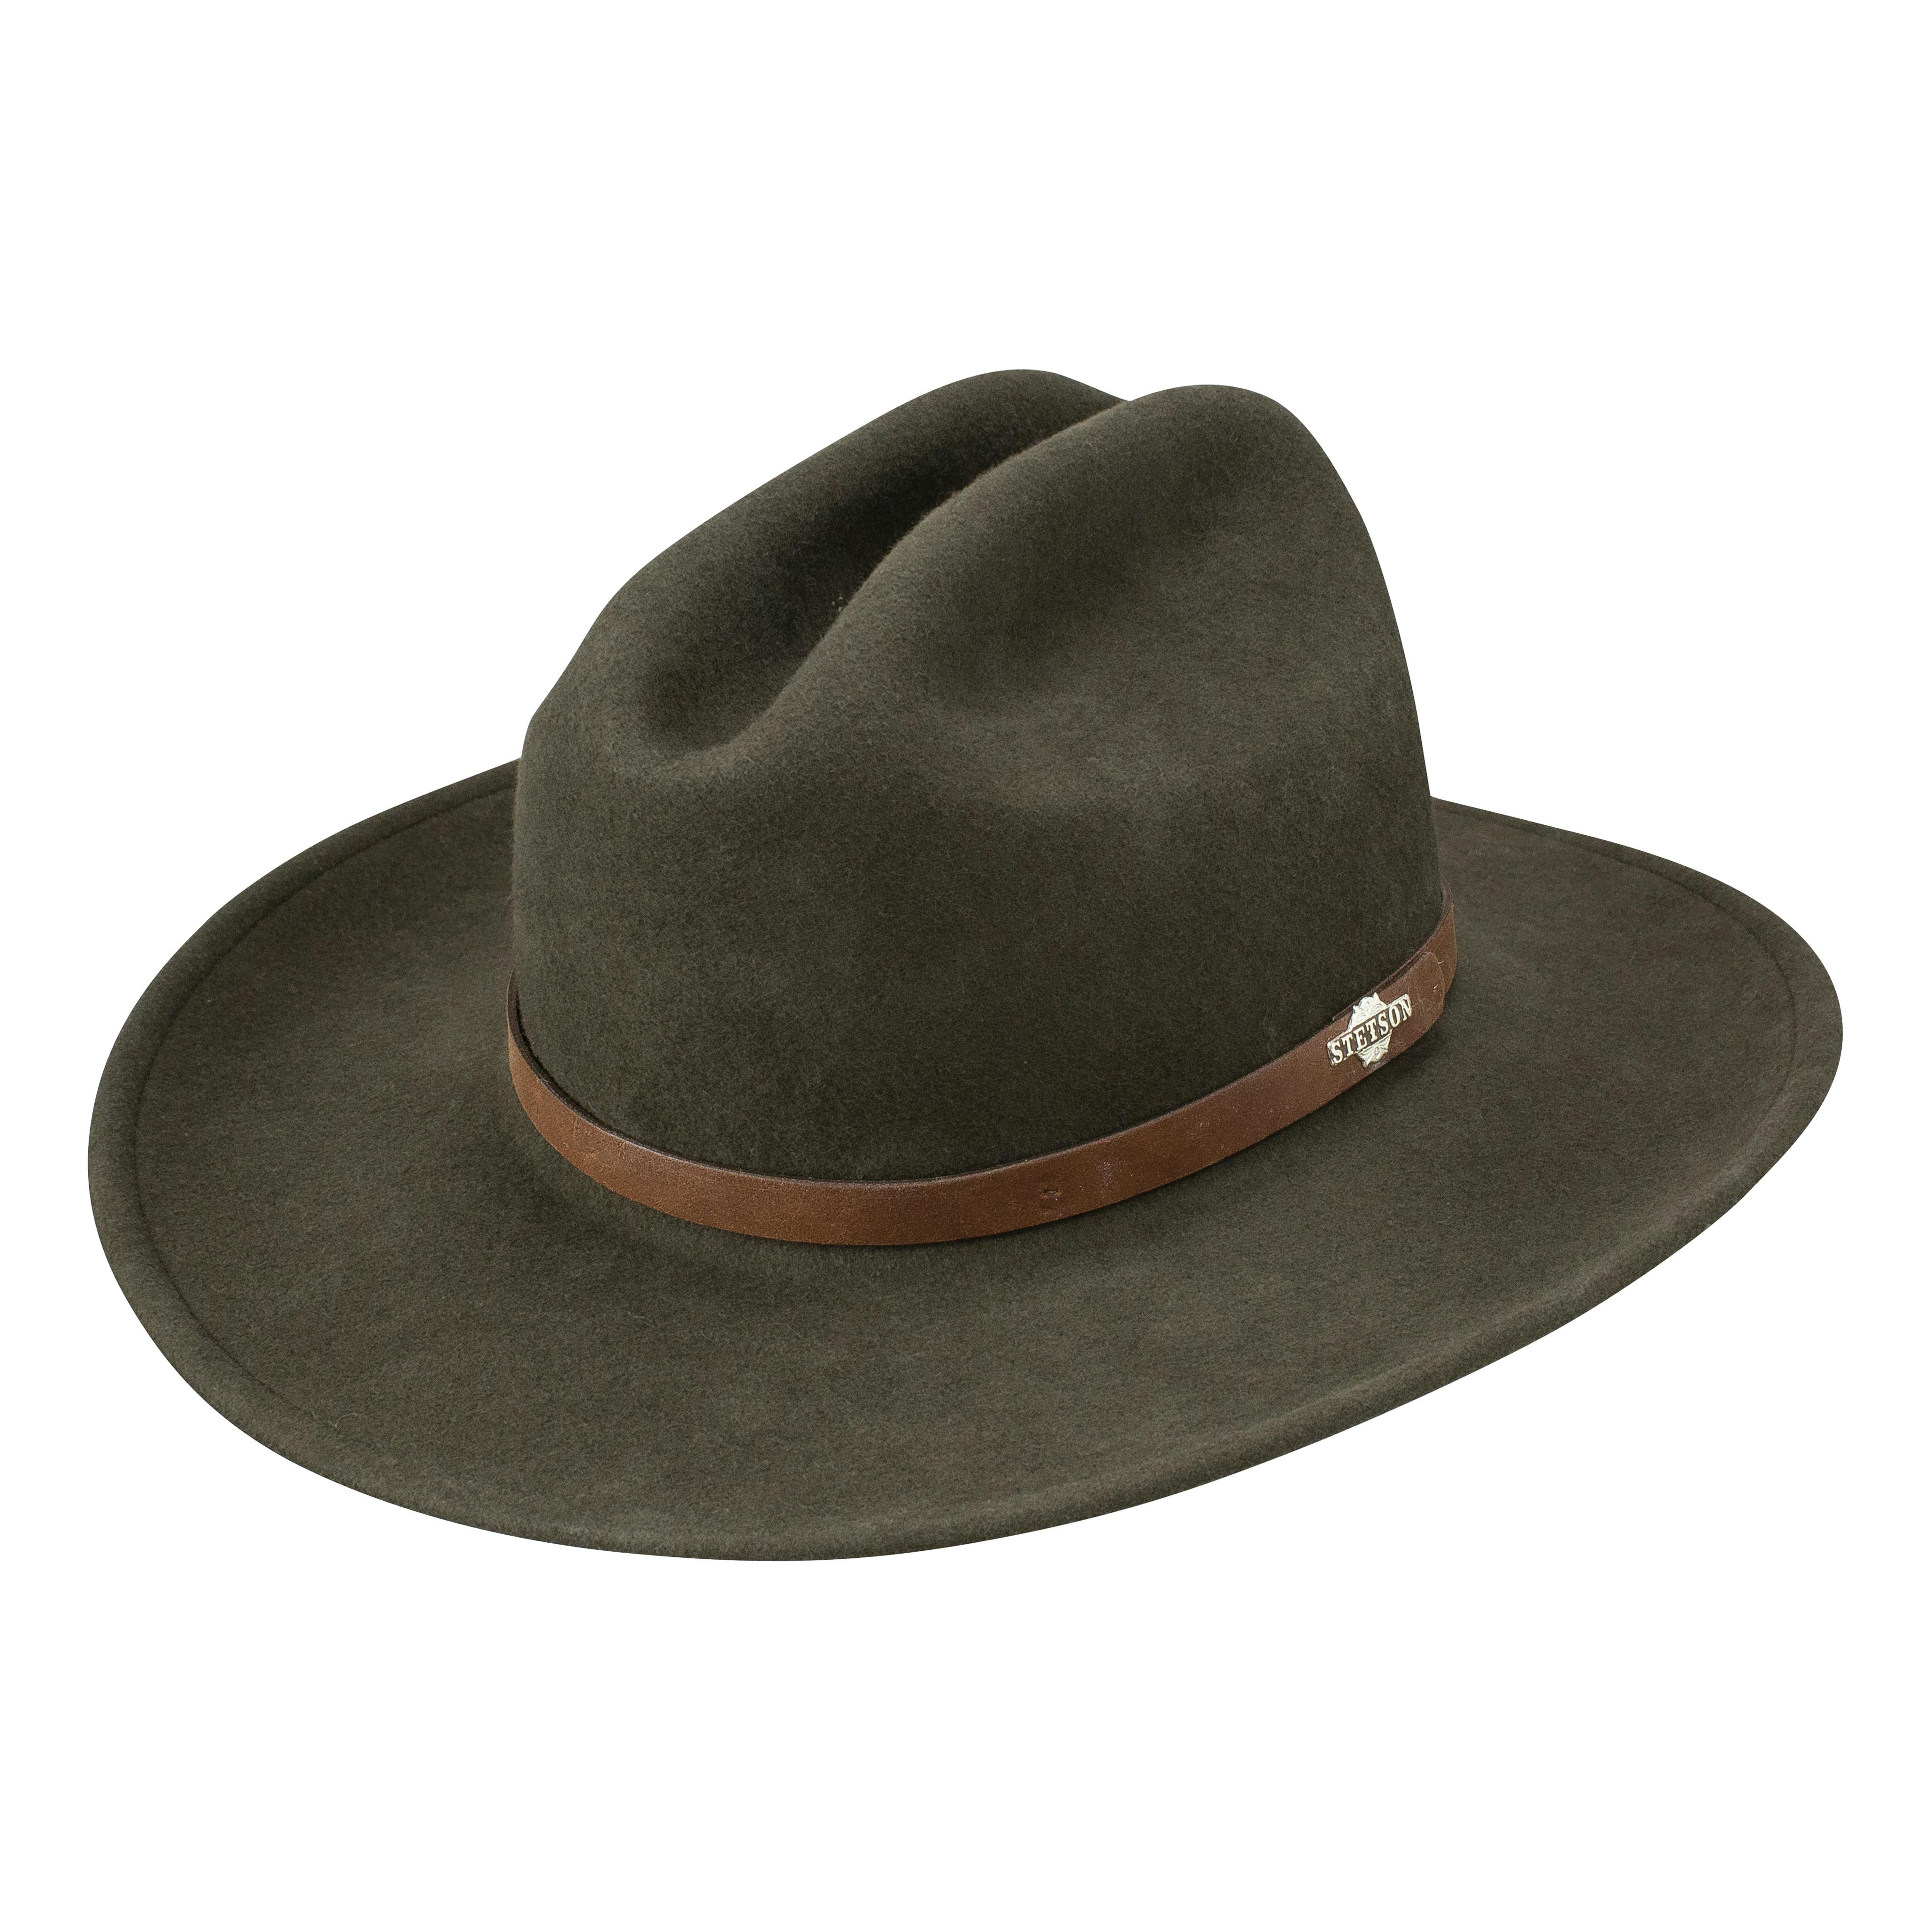 The Route 66 Crushable Hat